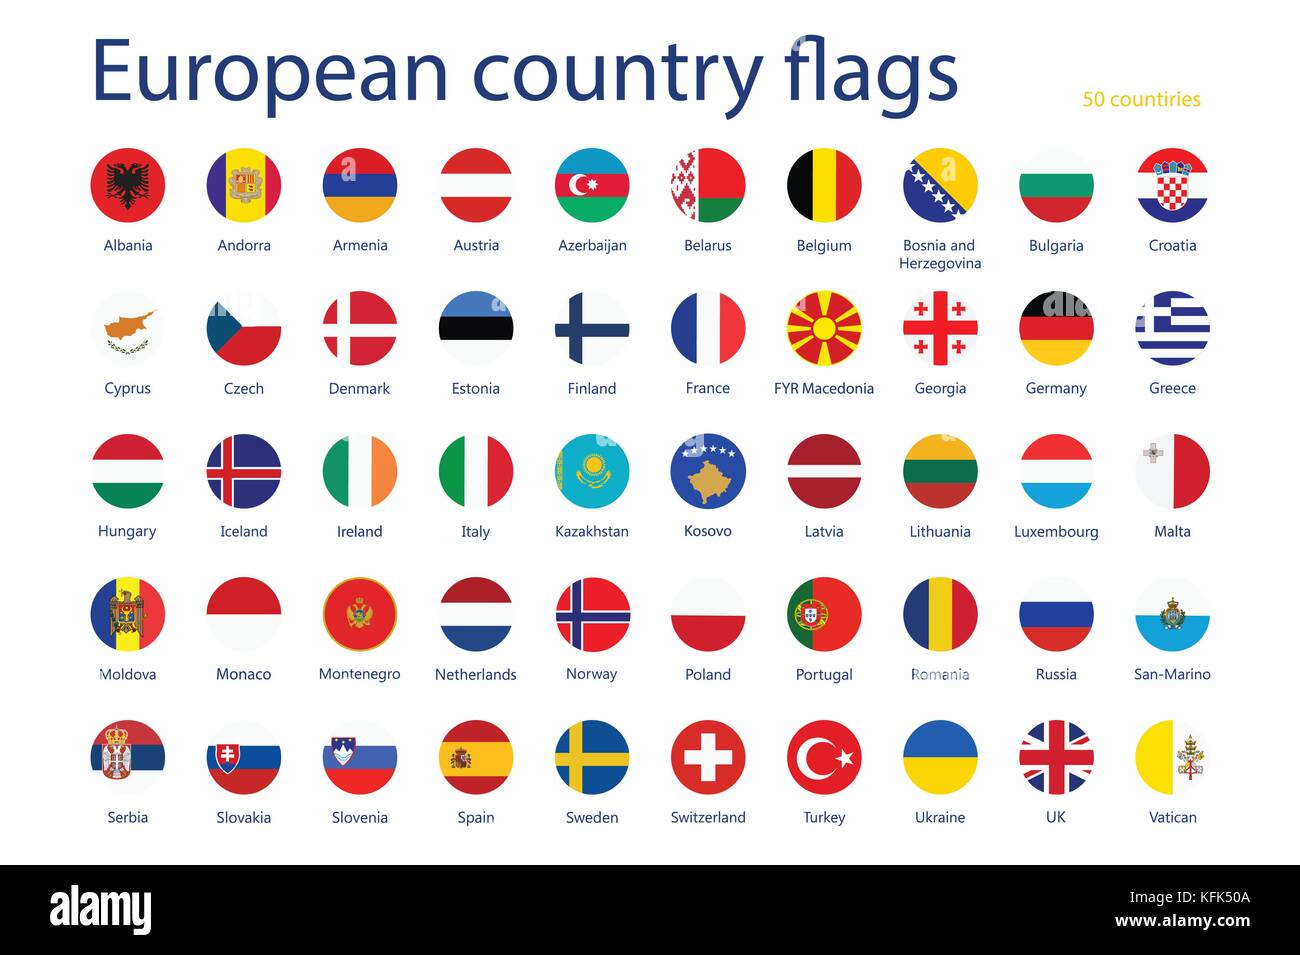 flags of european countries with names